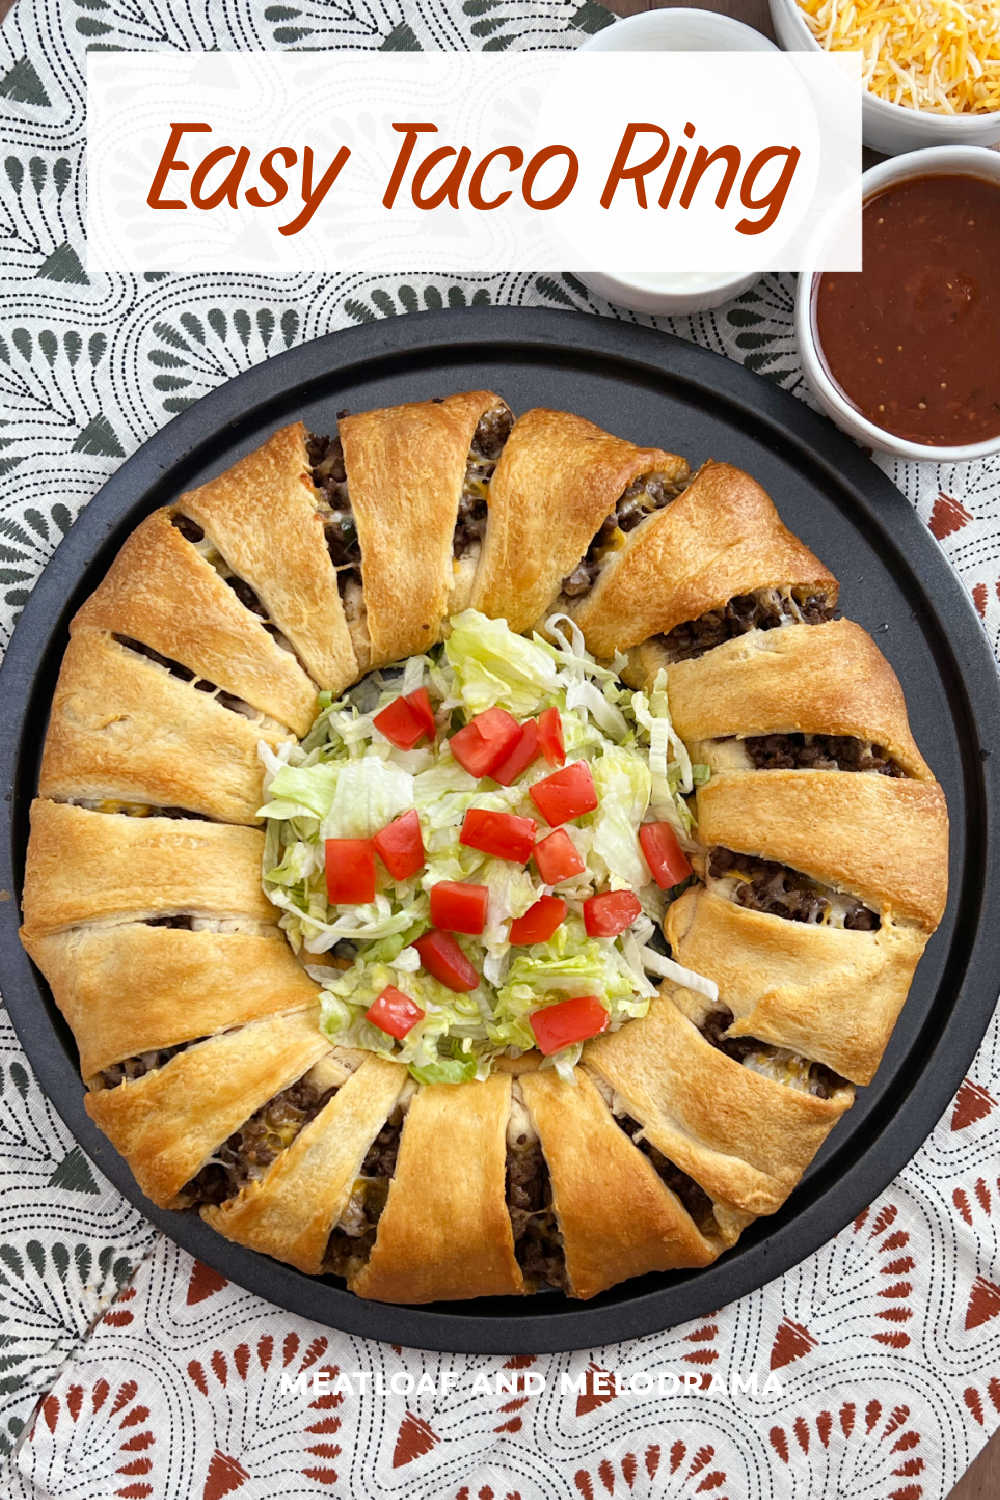 This Easy Taco Ring Recipe with Crescent Rolls is an easy dinner or appetizer made with taco meat baked in crescent roll dough. A family favorite perfect for Taco Night! via @meamel